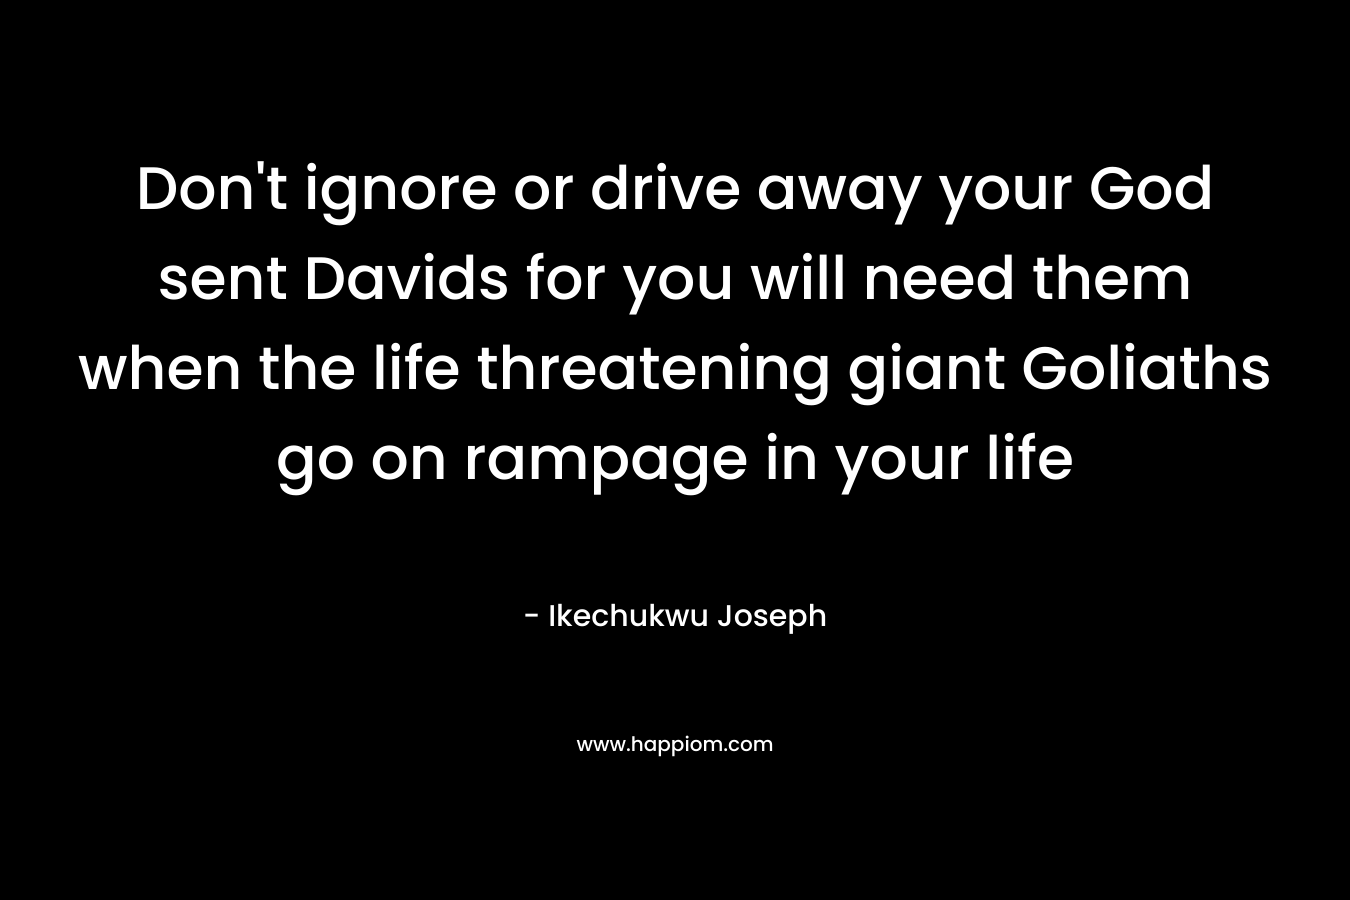 Don’t ignore or drive away your God sent Davids for you will need them when the life threatening giant Goliaths go on rampage in your life – Ikechukwu Joseph